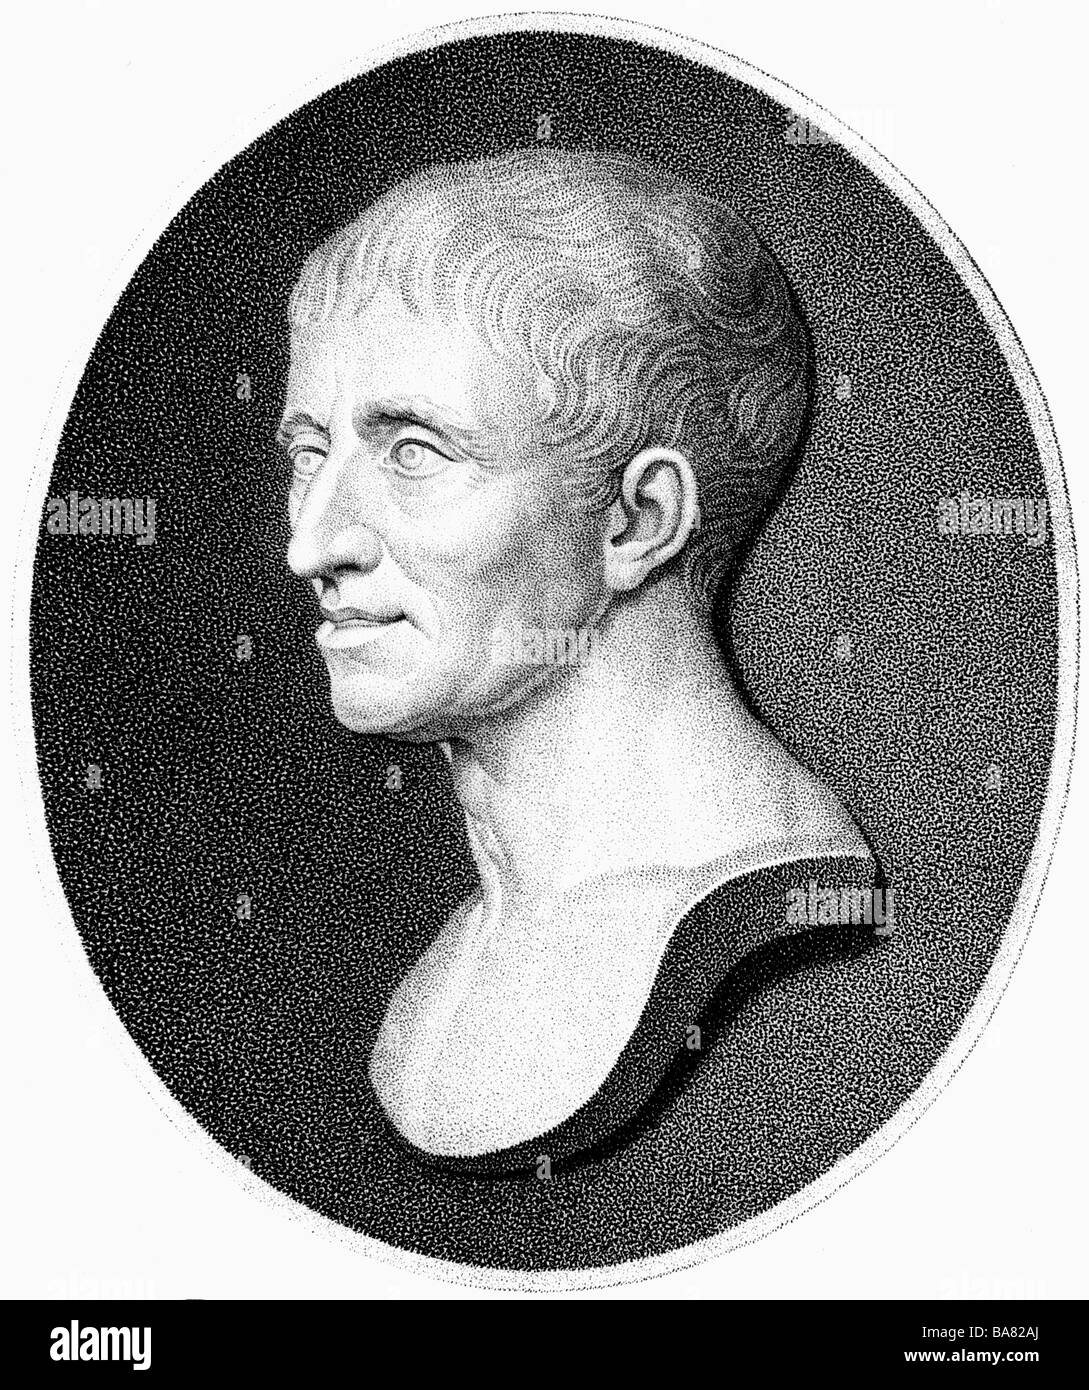 Haydn, Joseph, 31.3.1732 - 31.5.1809, Austrian composer, portrait, steel engraving, 19th century, , Artist's Copyright has not to be cleared Stock Photo